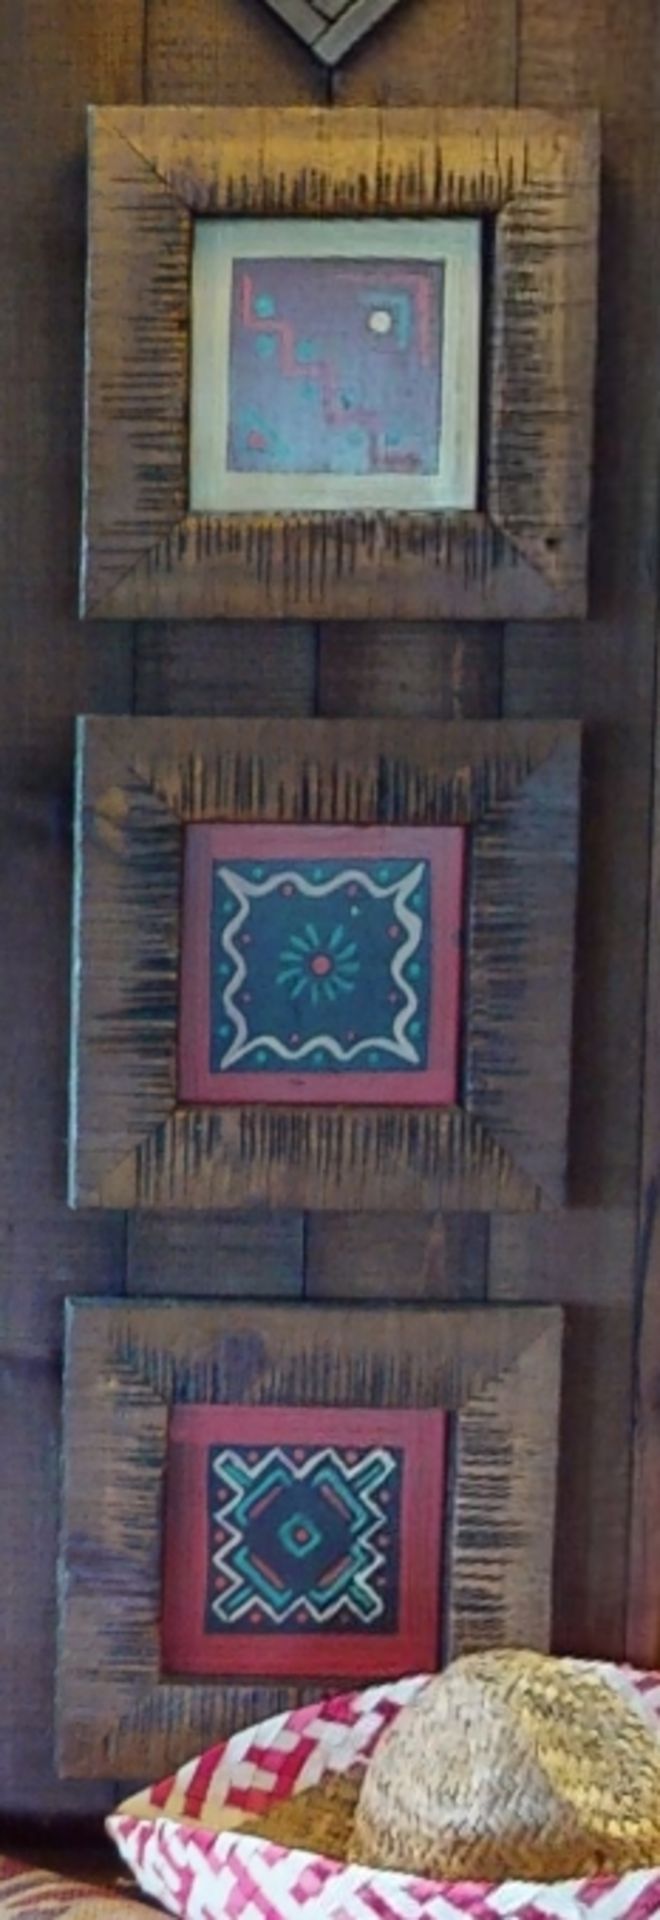 Approx 30 x Pieces of Wall Art From a Mexican Themed Restaurant - Image 16 of 26